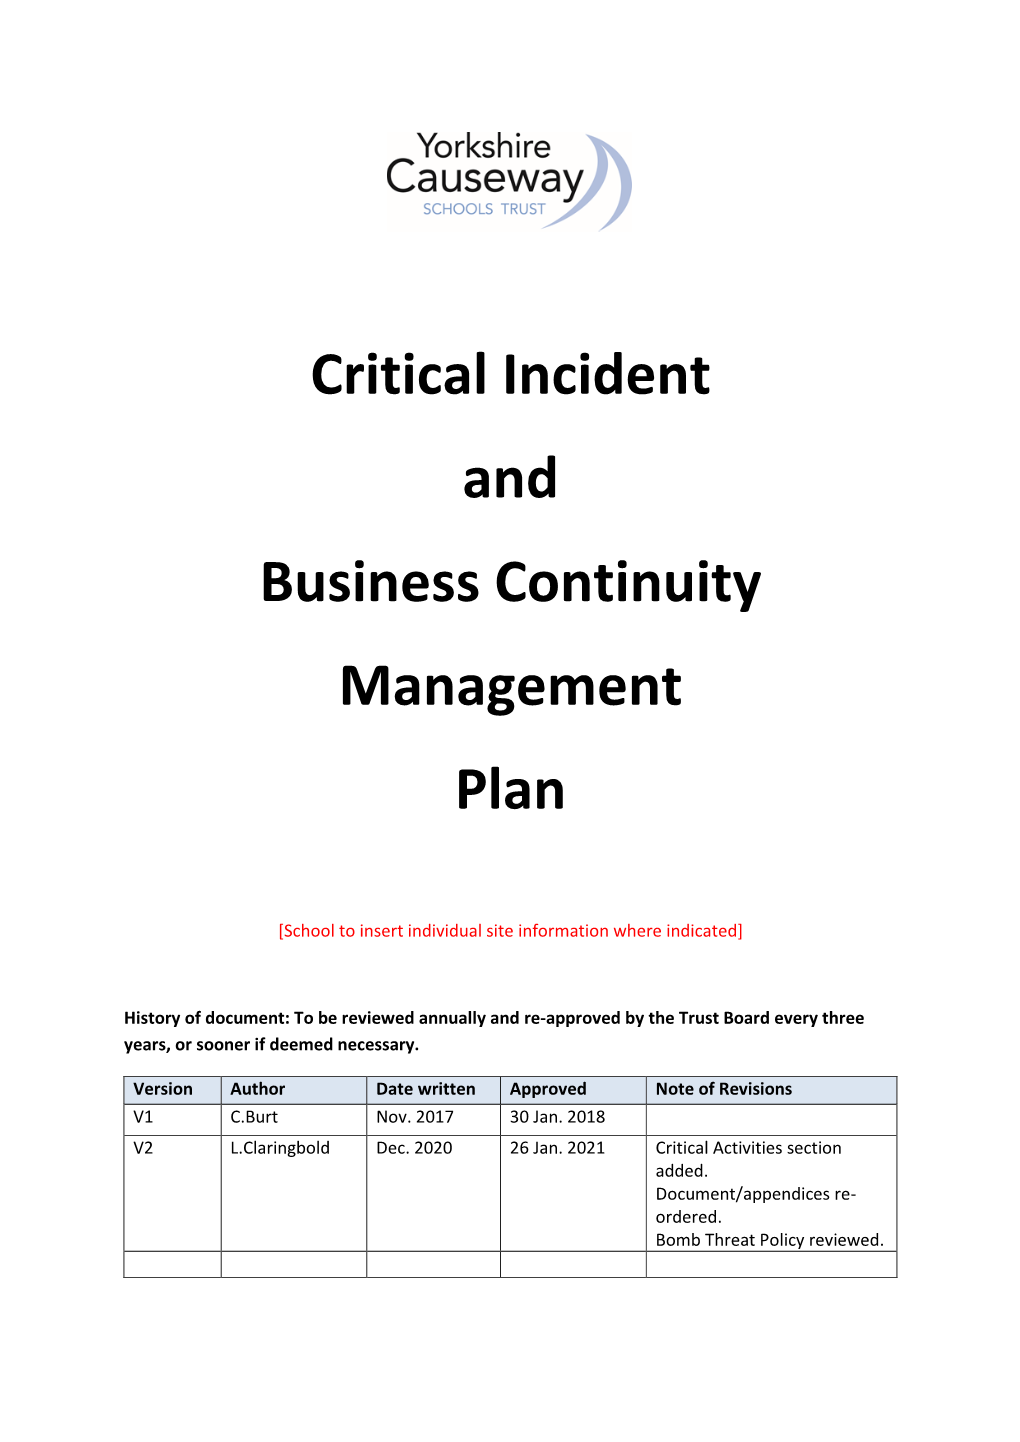 Critical Incident and Business Continuity Management Plan